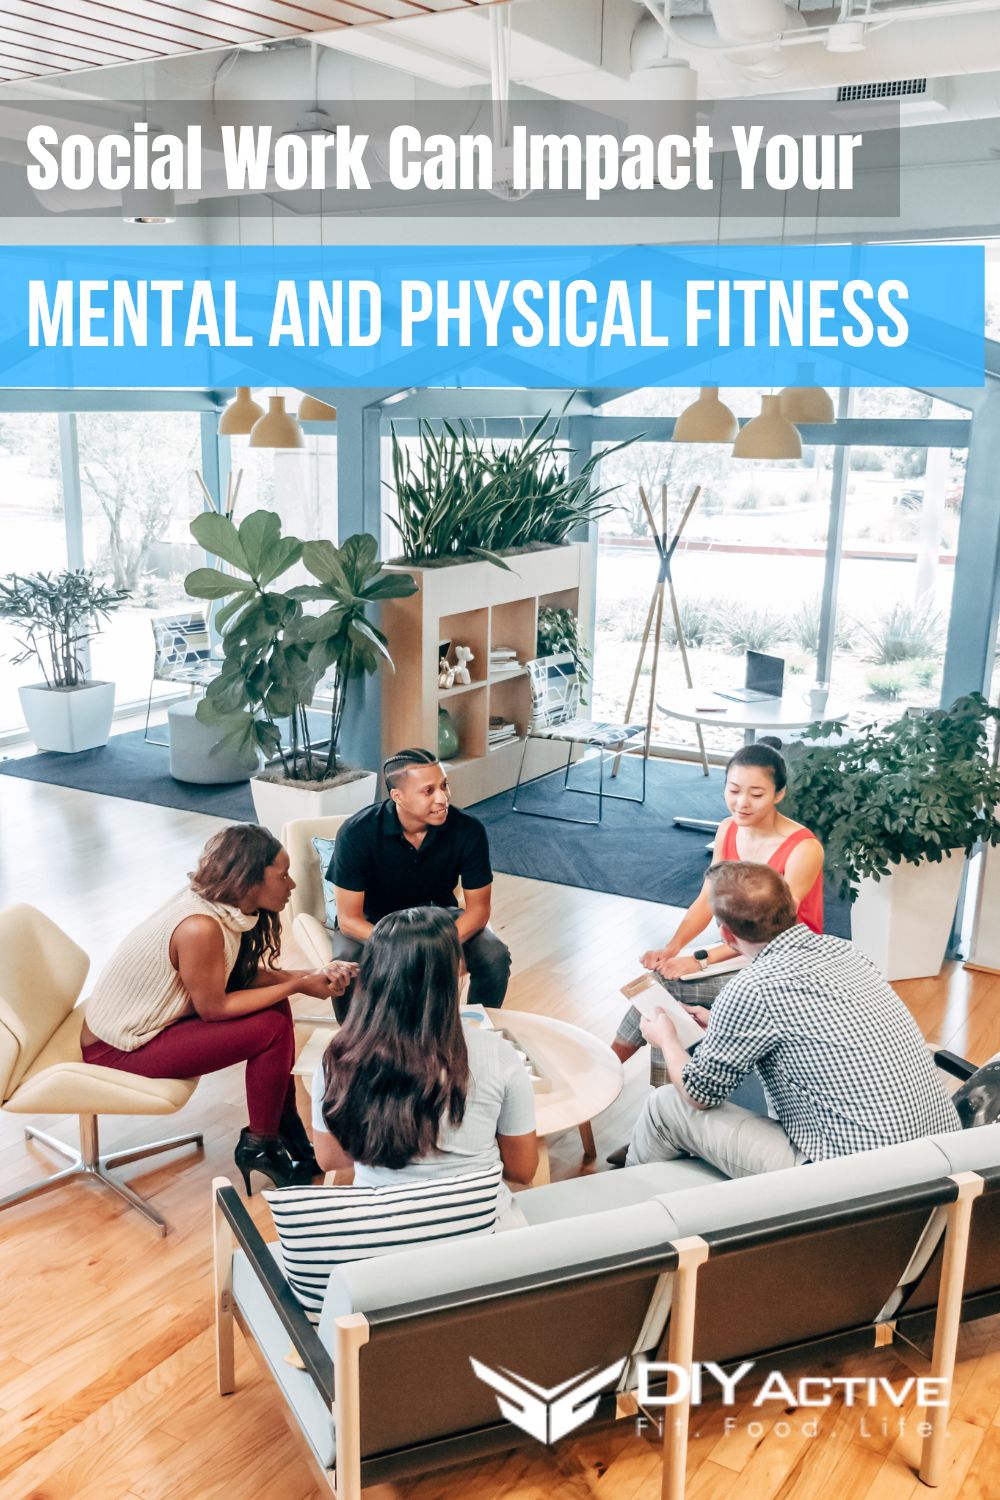 5 Ways Social Work Can Impact Your Mental And Physical Fitness